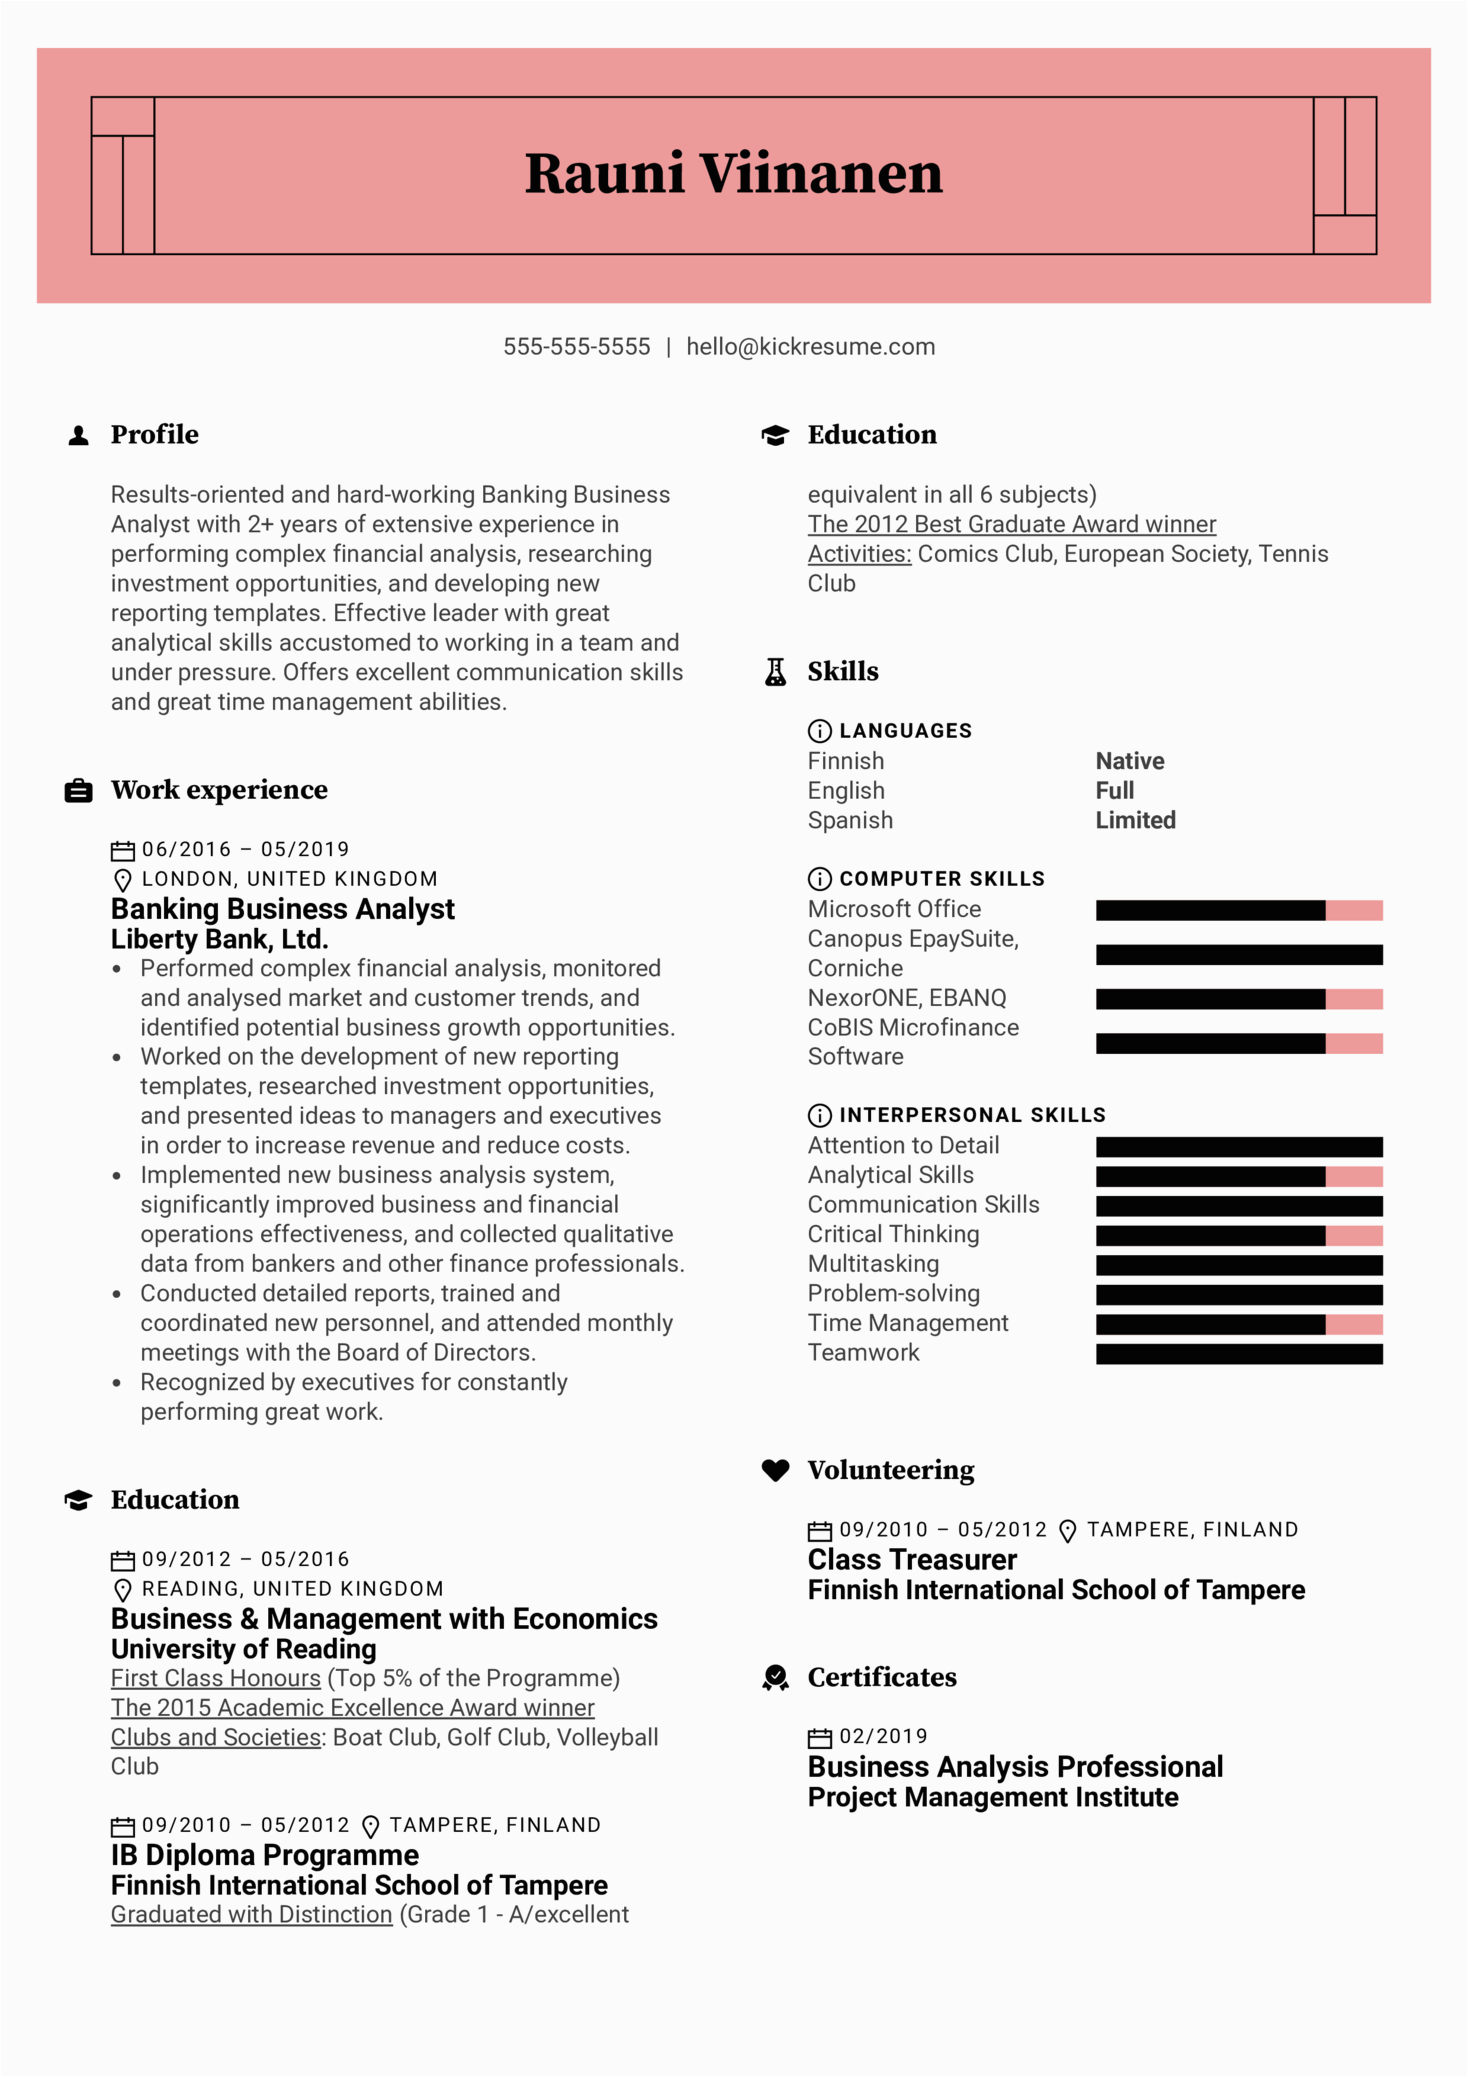 Sample Resume for Banking Business Analyst Banking Business Analyst Resume Sample